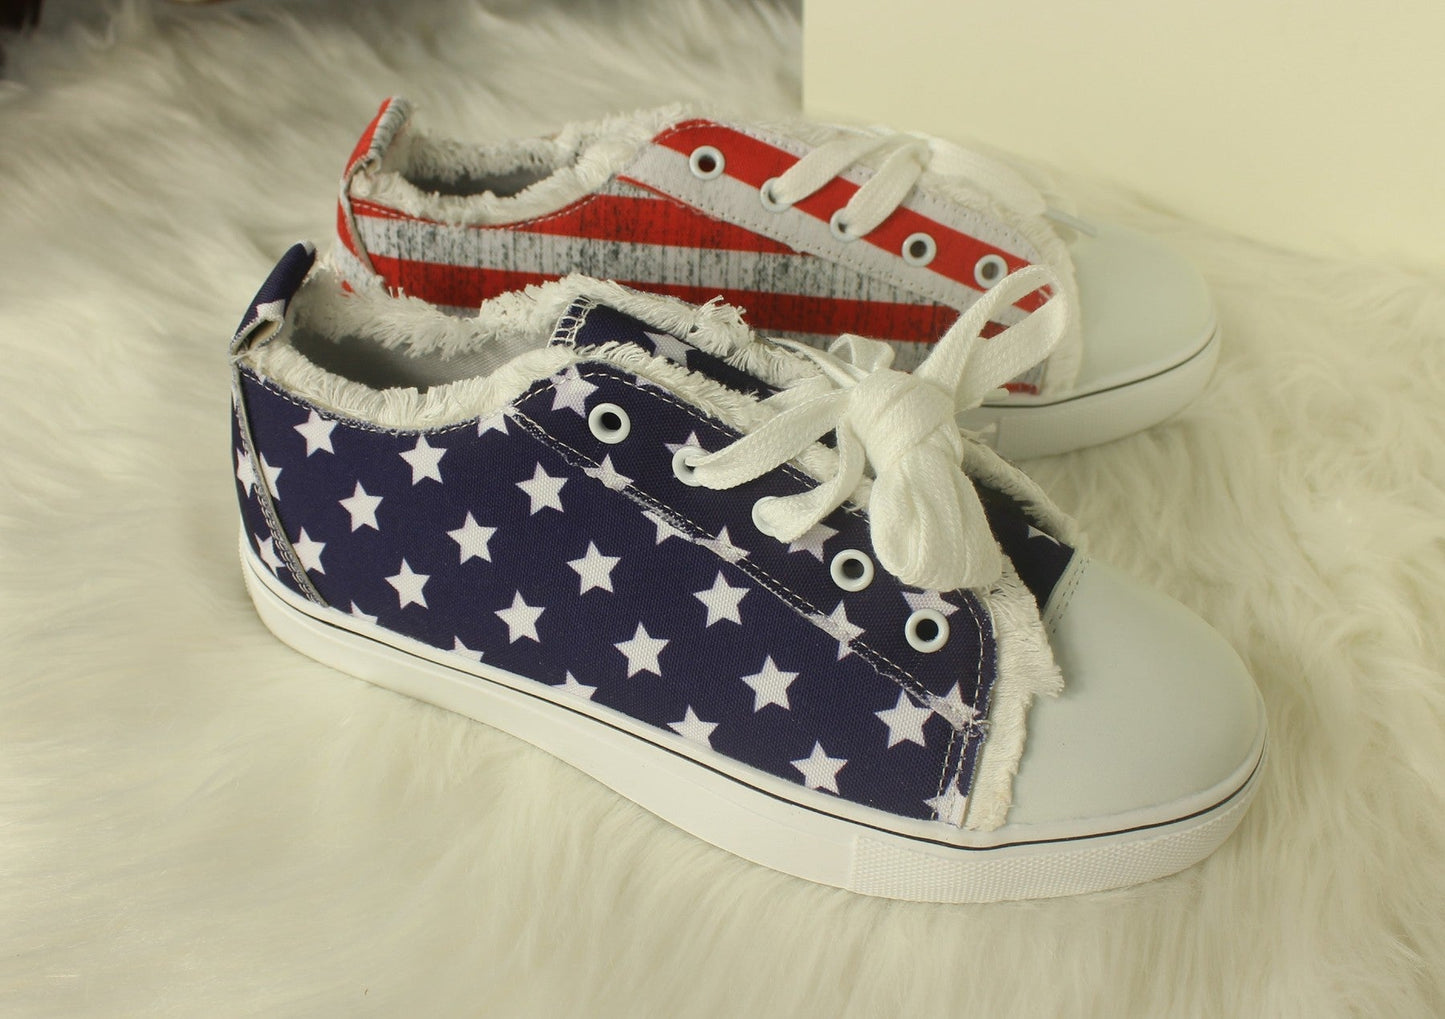 STAR STRIPED LACE UP SNEAKERS